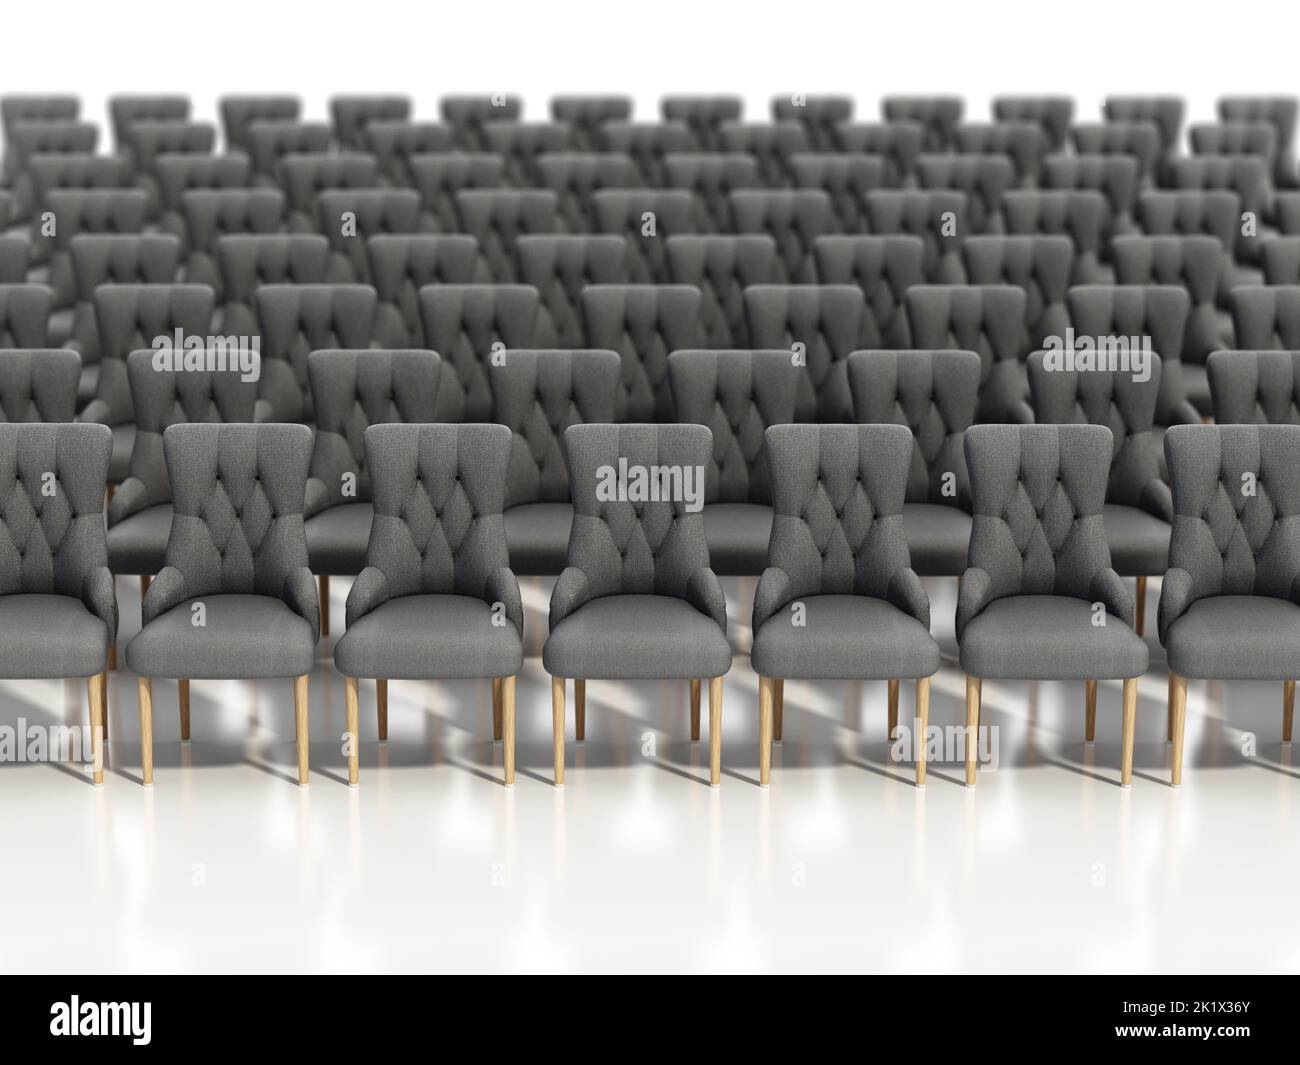 Rows of gray fabric chairs with wooden legs. 3D illustration. Stock Photo